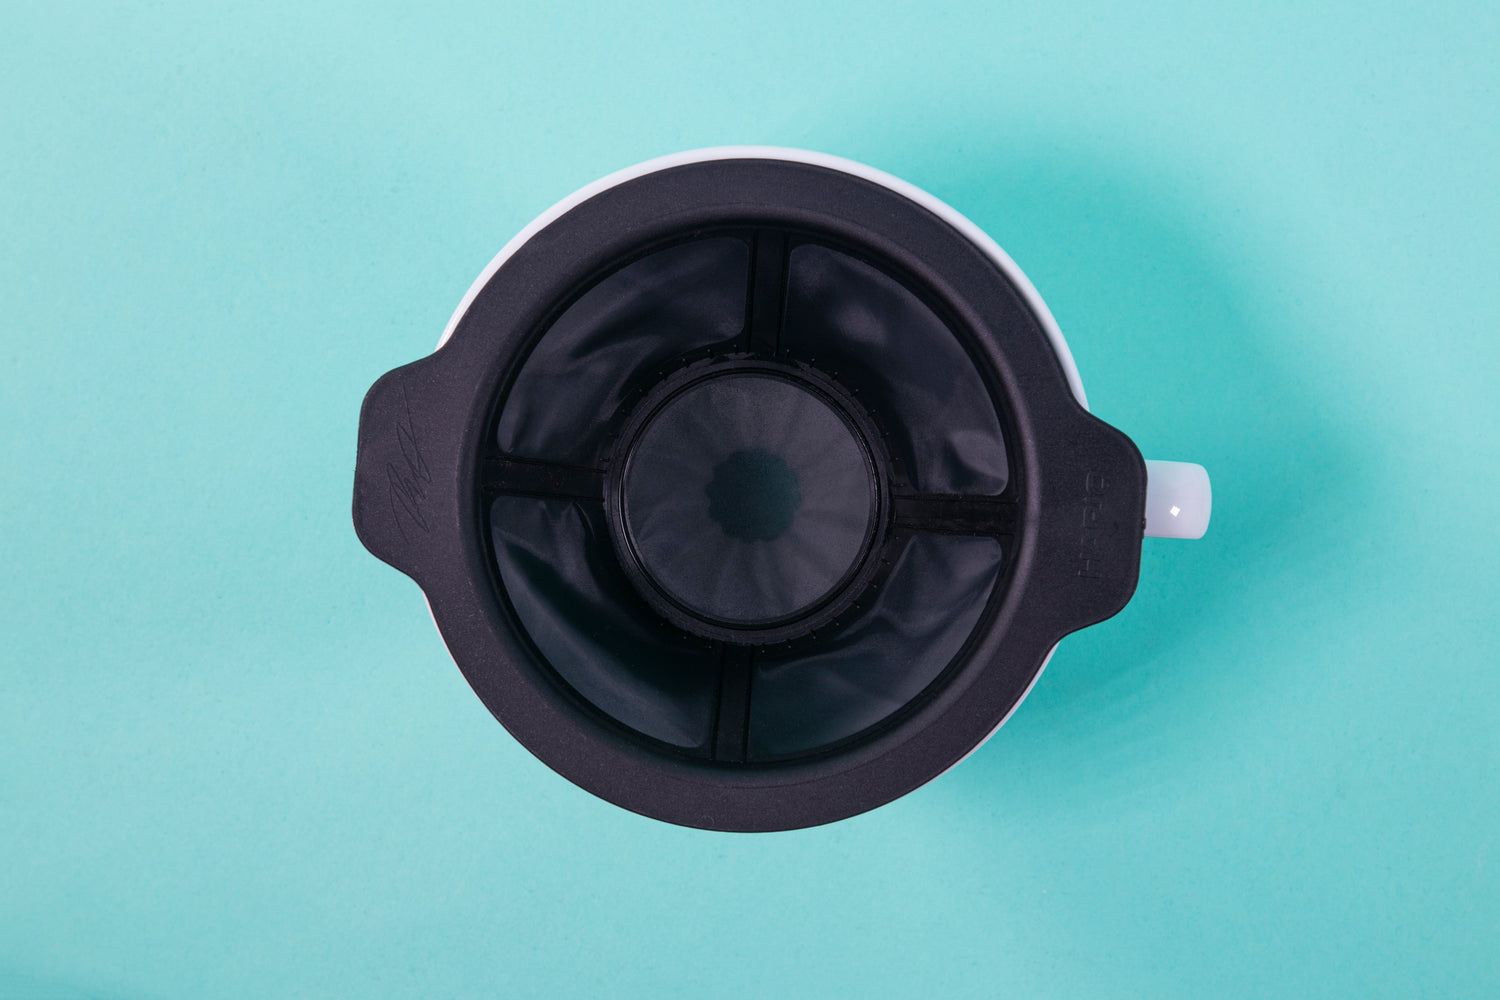 Aerial view of the black plastic filter insert and white ceramic ridges of the white cone shaped dripper on a blue background.